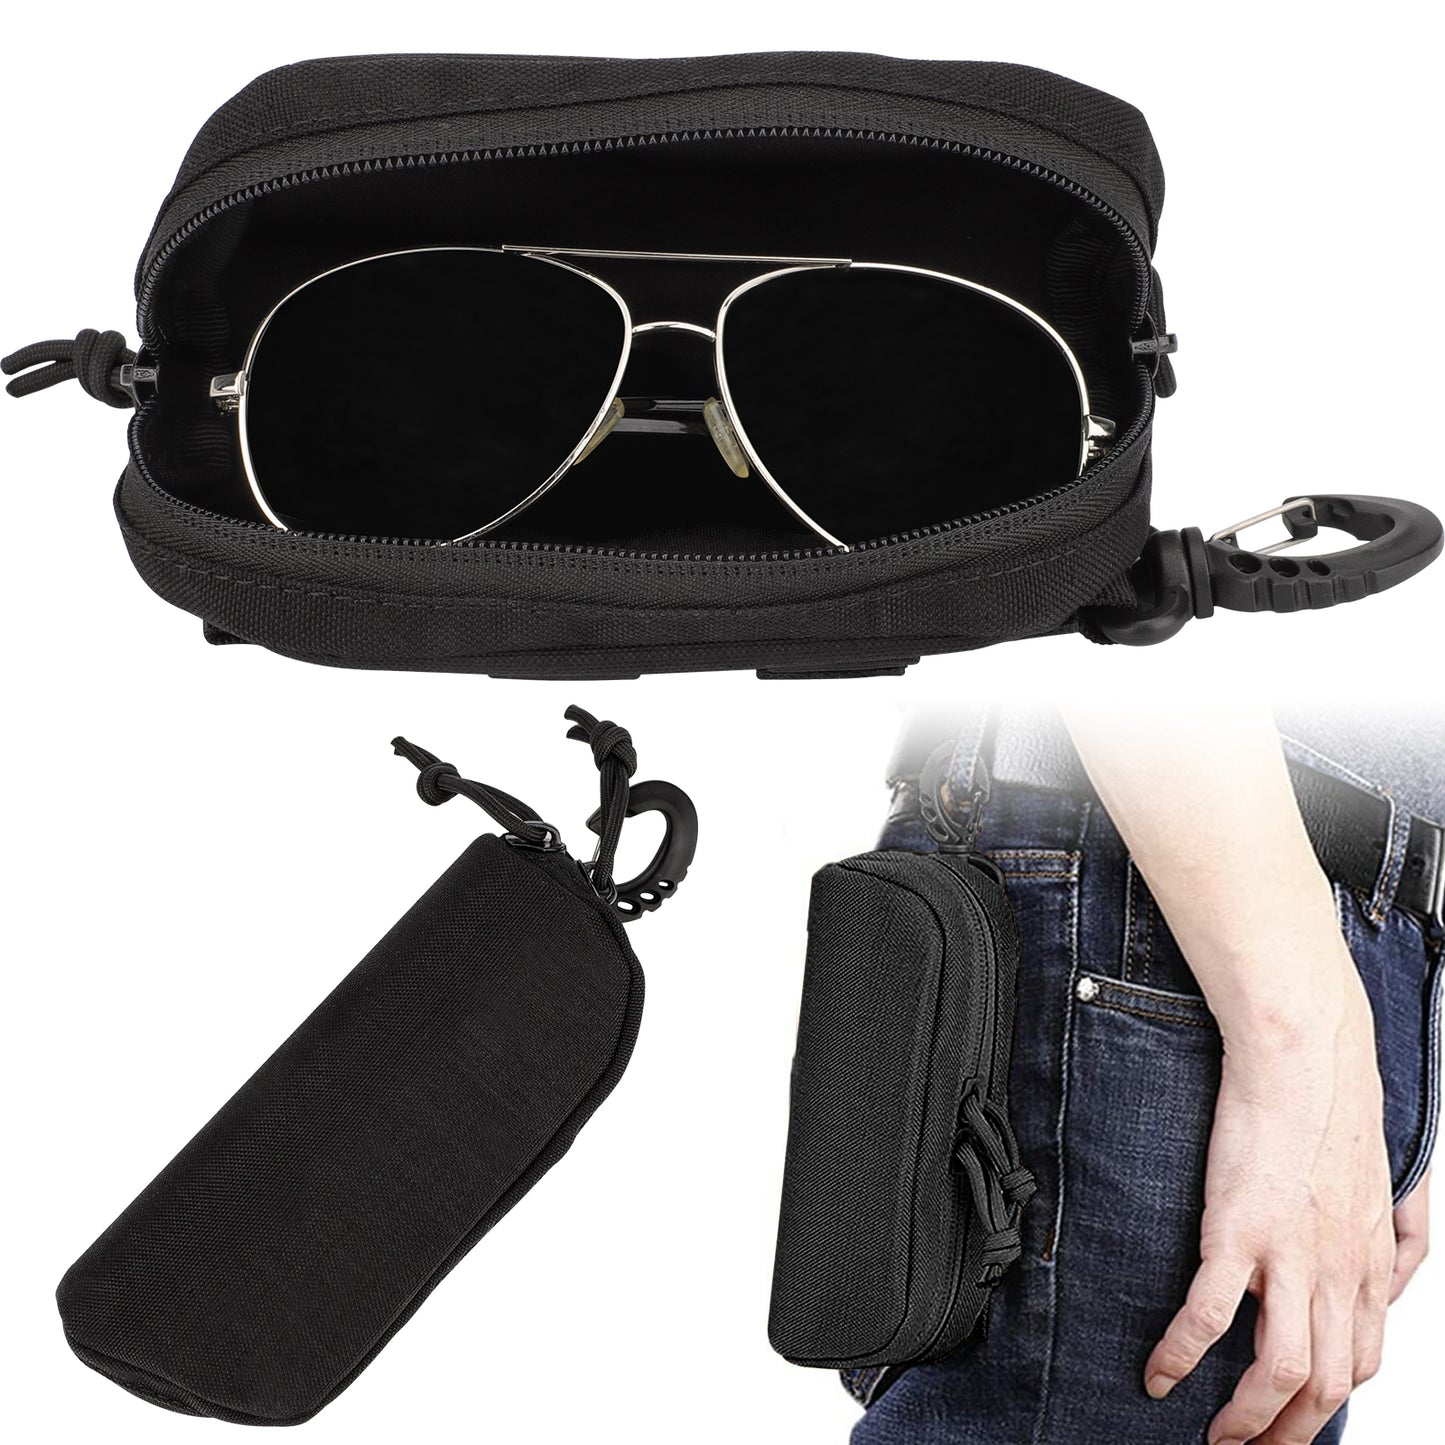 Glasses Pouch - Lightweight and Protective Case for Eyewear